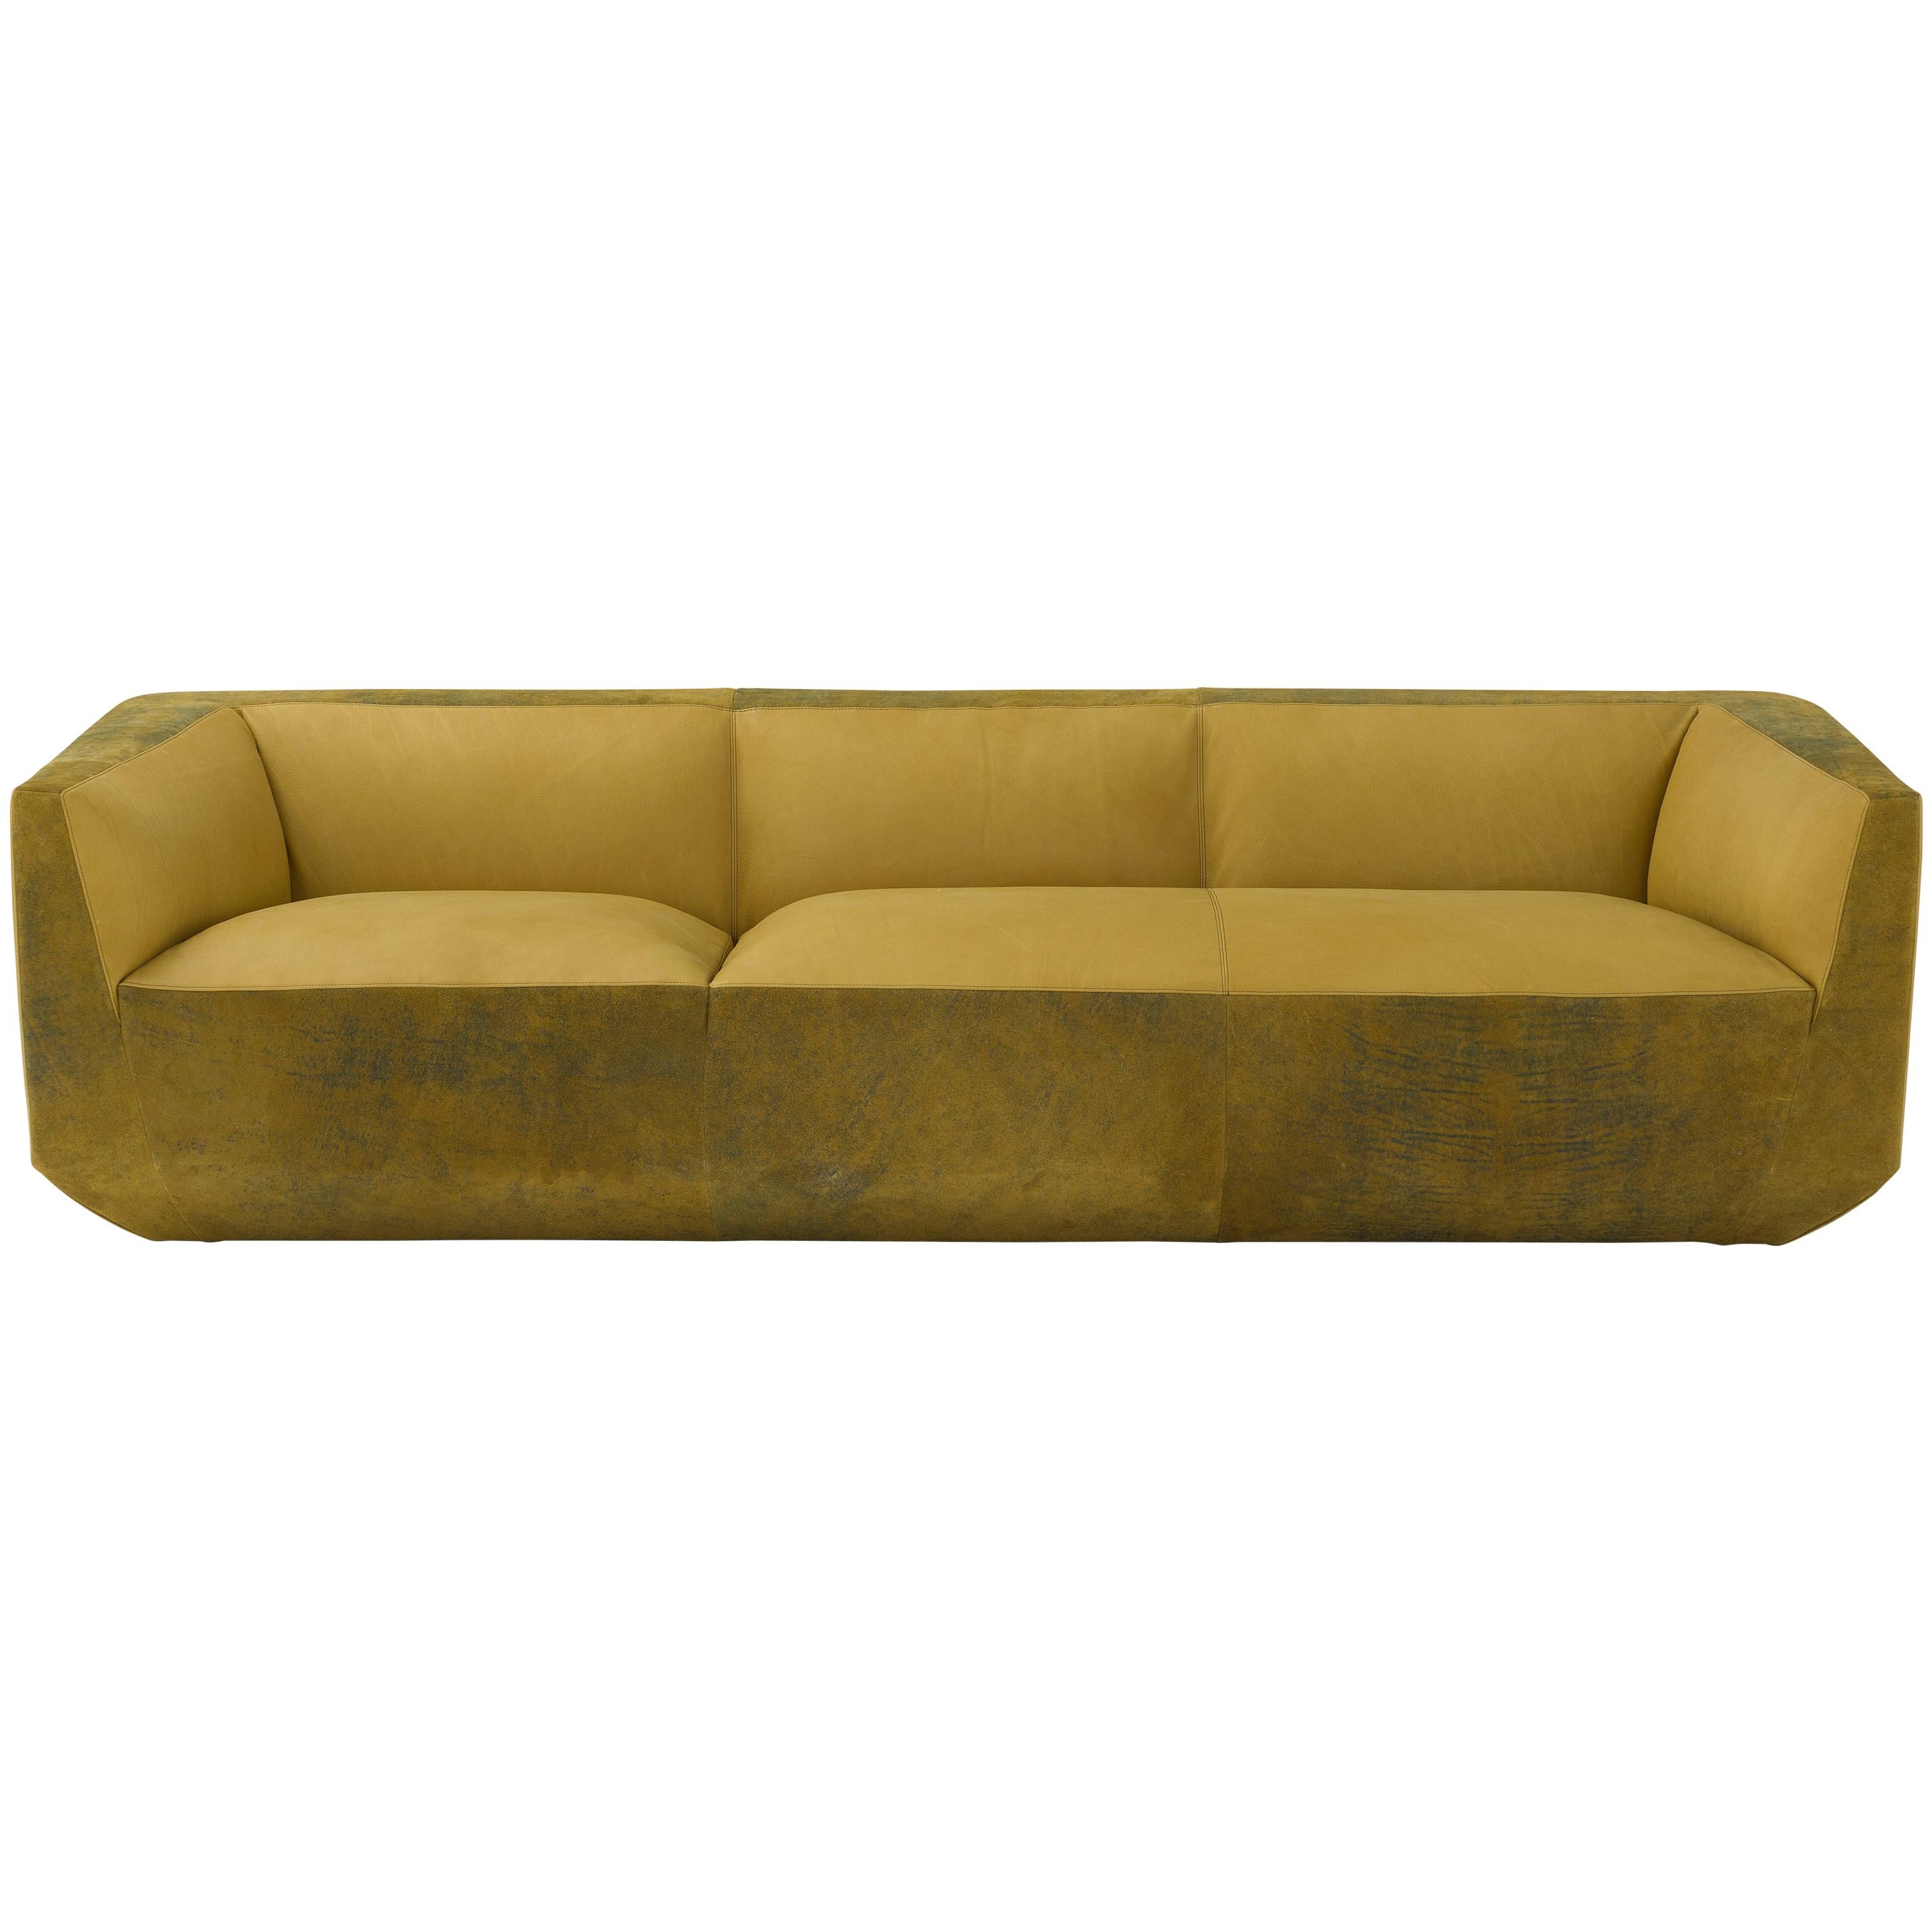 Panis Four-Seat Leather Sofa in Yellow by Emanuel Gargano & Anton Cristell For Sale